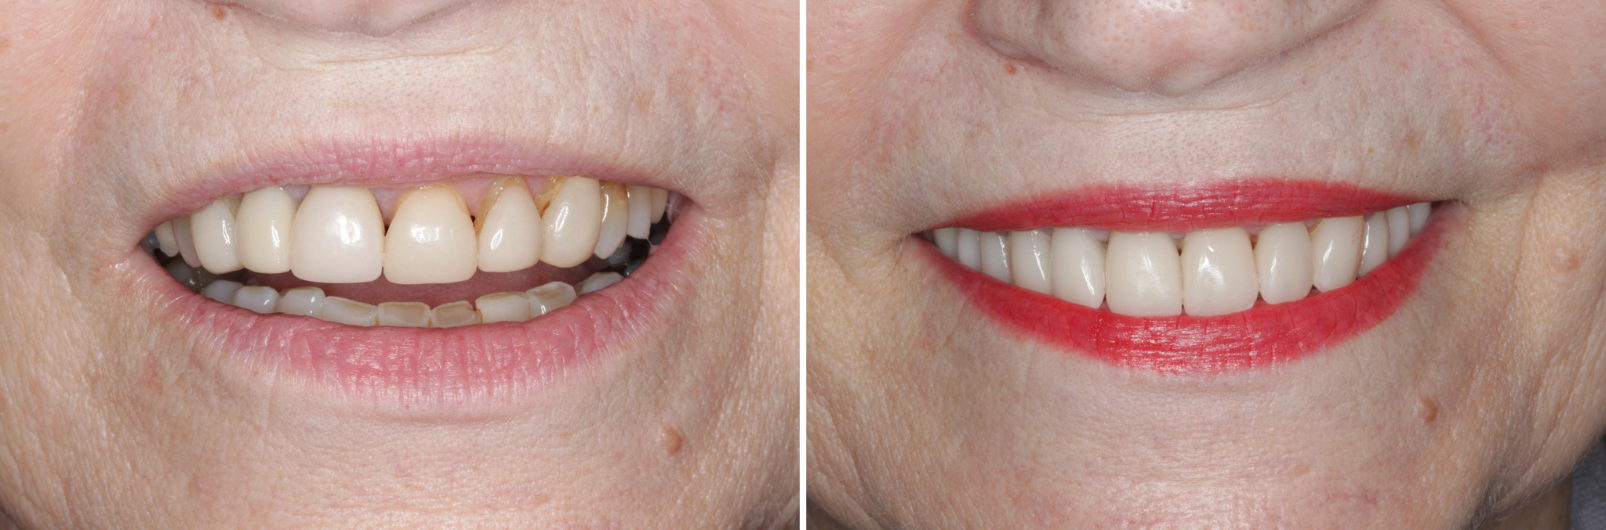 Case 1 - Before and After - Virtual Smile Design